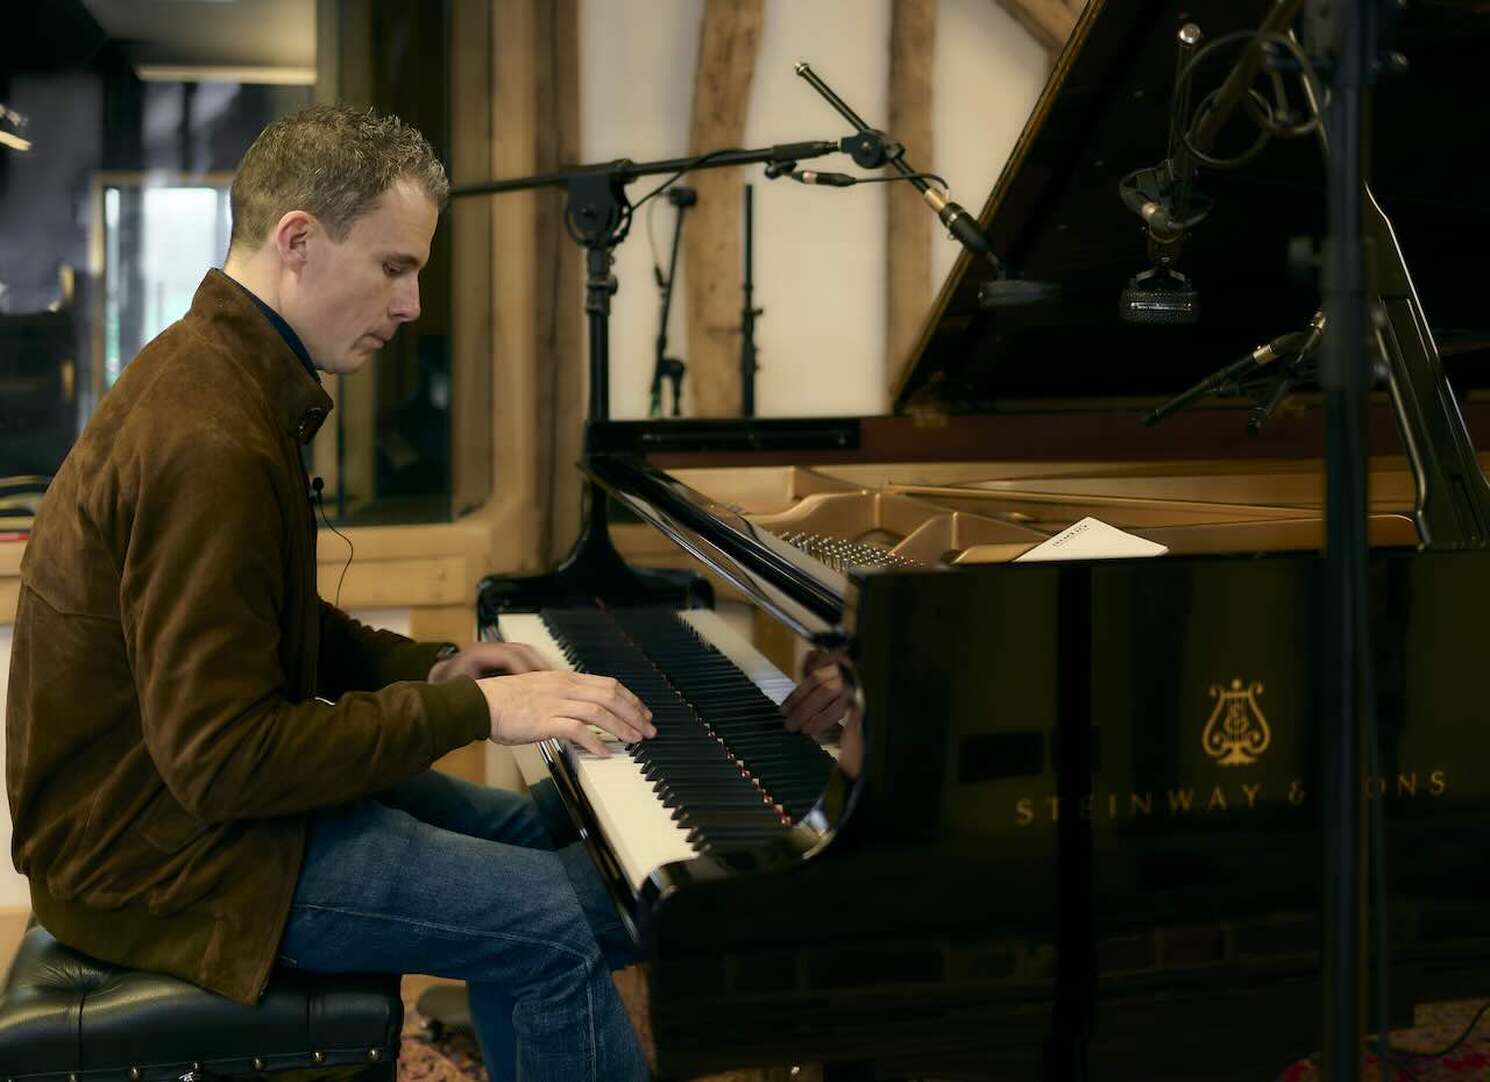 Ben Andrew plays the Steinway Model D grand piano